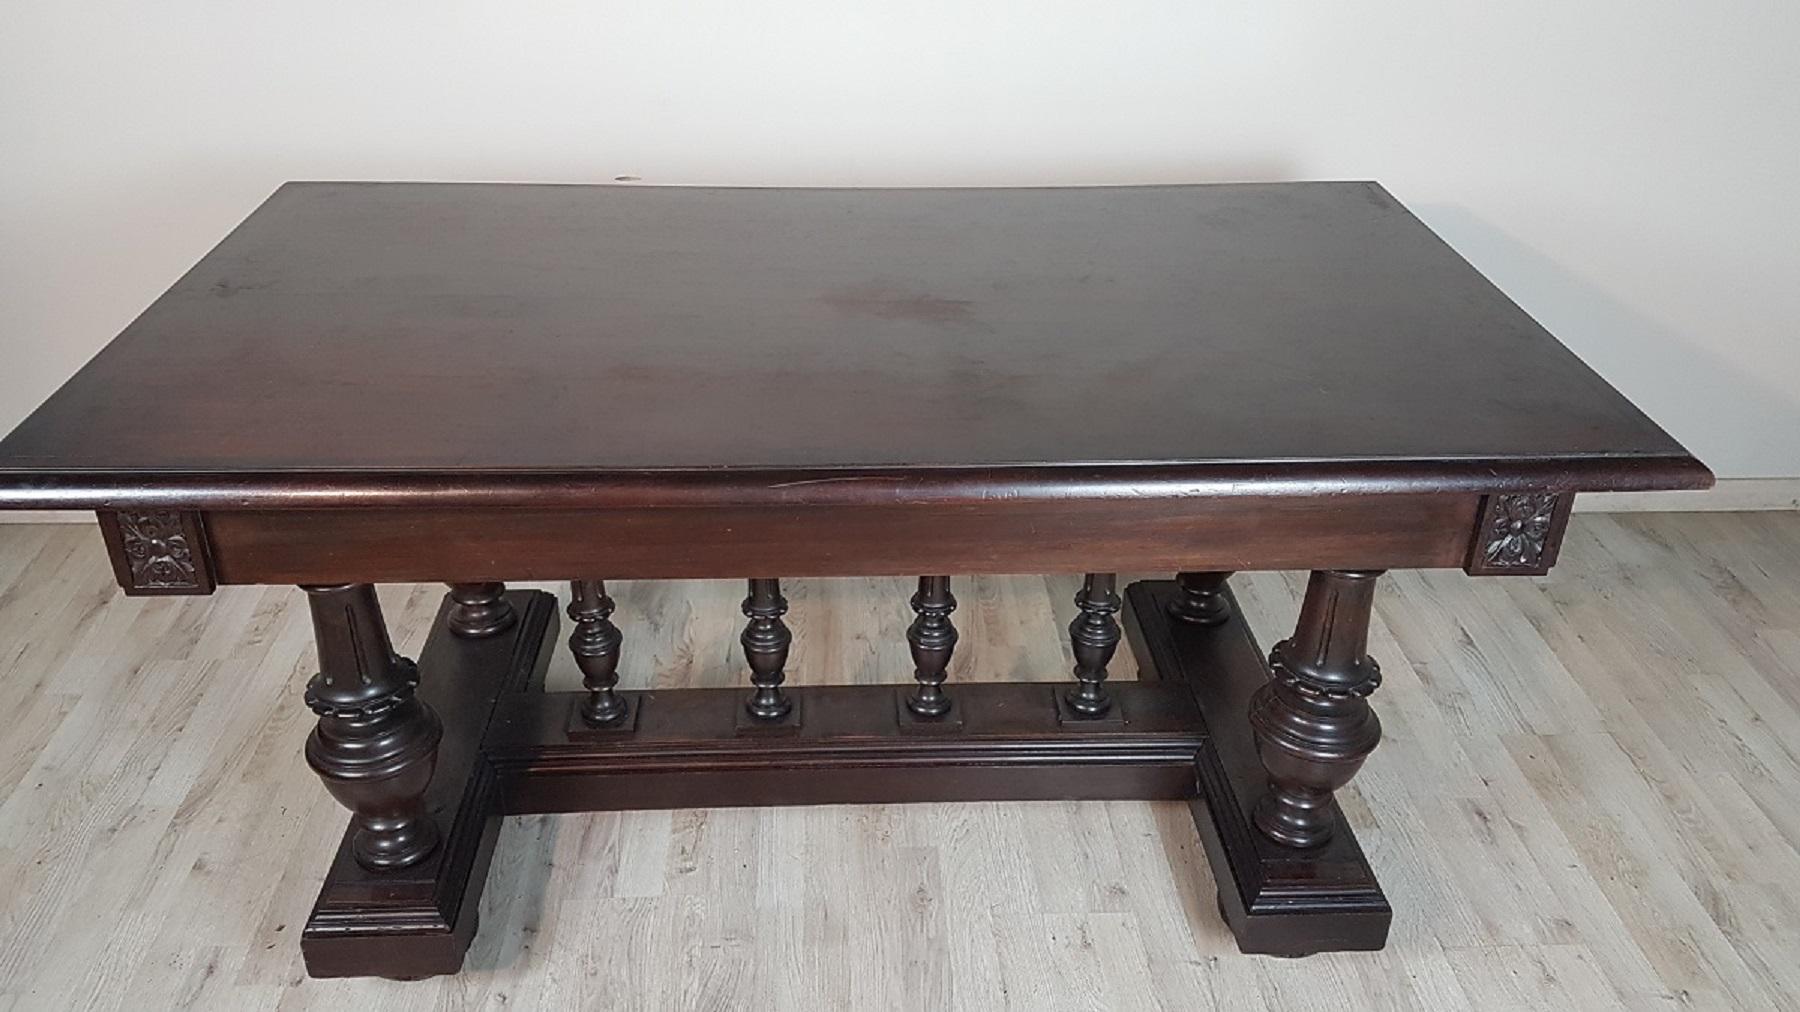 Elegant antique table ideal for dining room extendable on the sides The table can be dated around the end of the 18th century in the Neo-Renaissance period. The table is made of solid patina walnut, the band is narrow and therefore convenient for